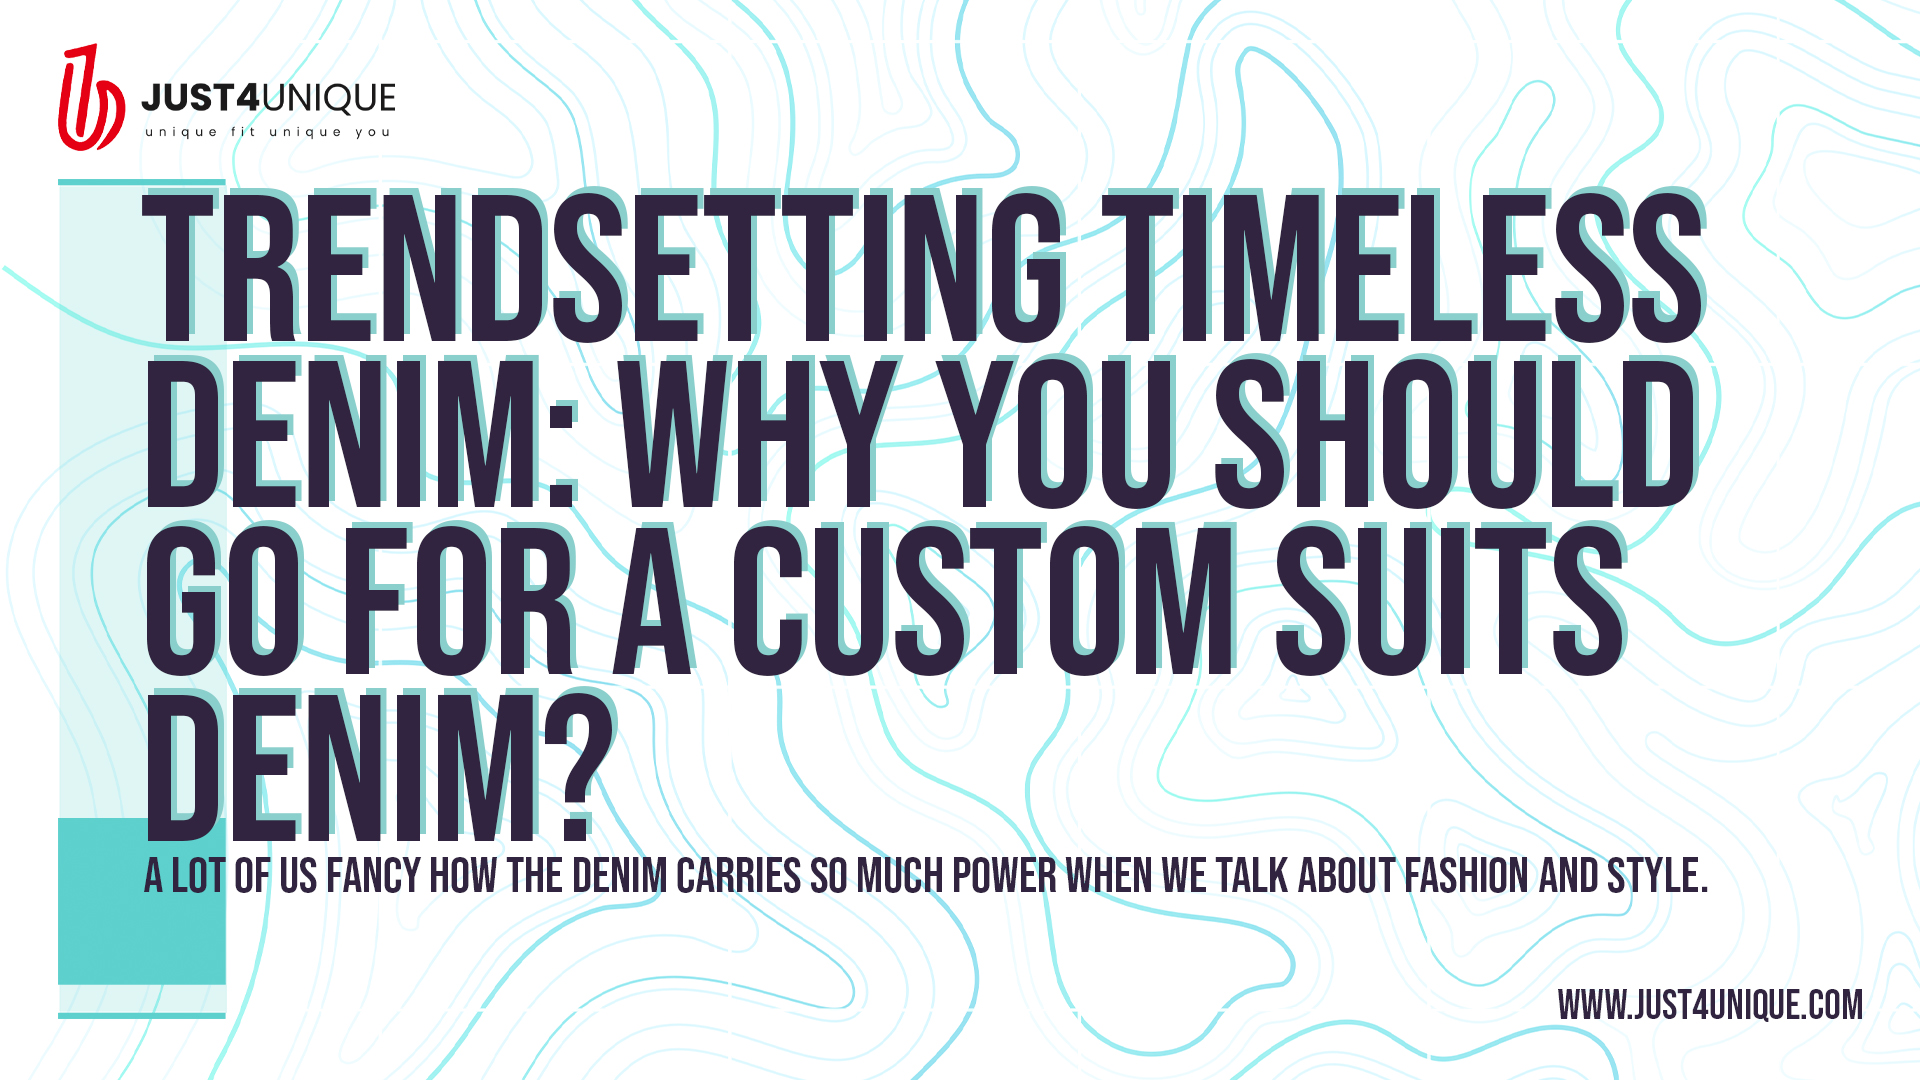 Trendsetting Timeless Denim: Why You Should Go for a Custom Suits Denim?